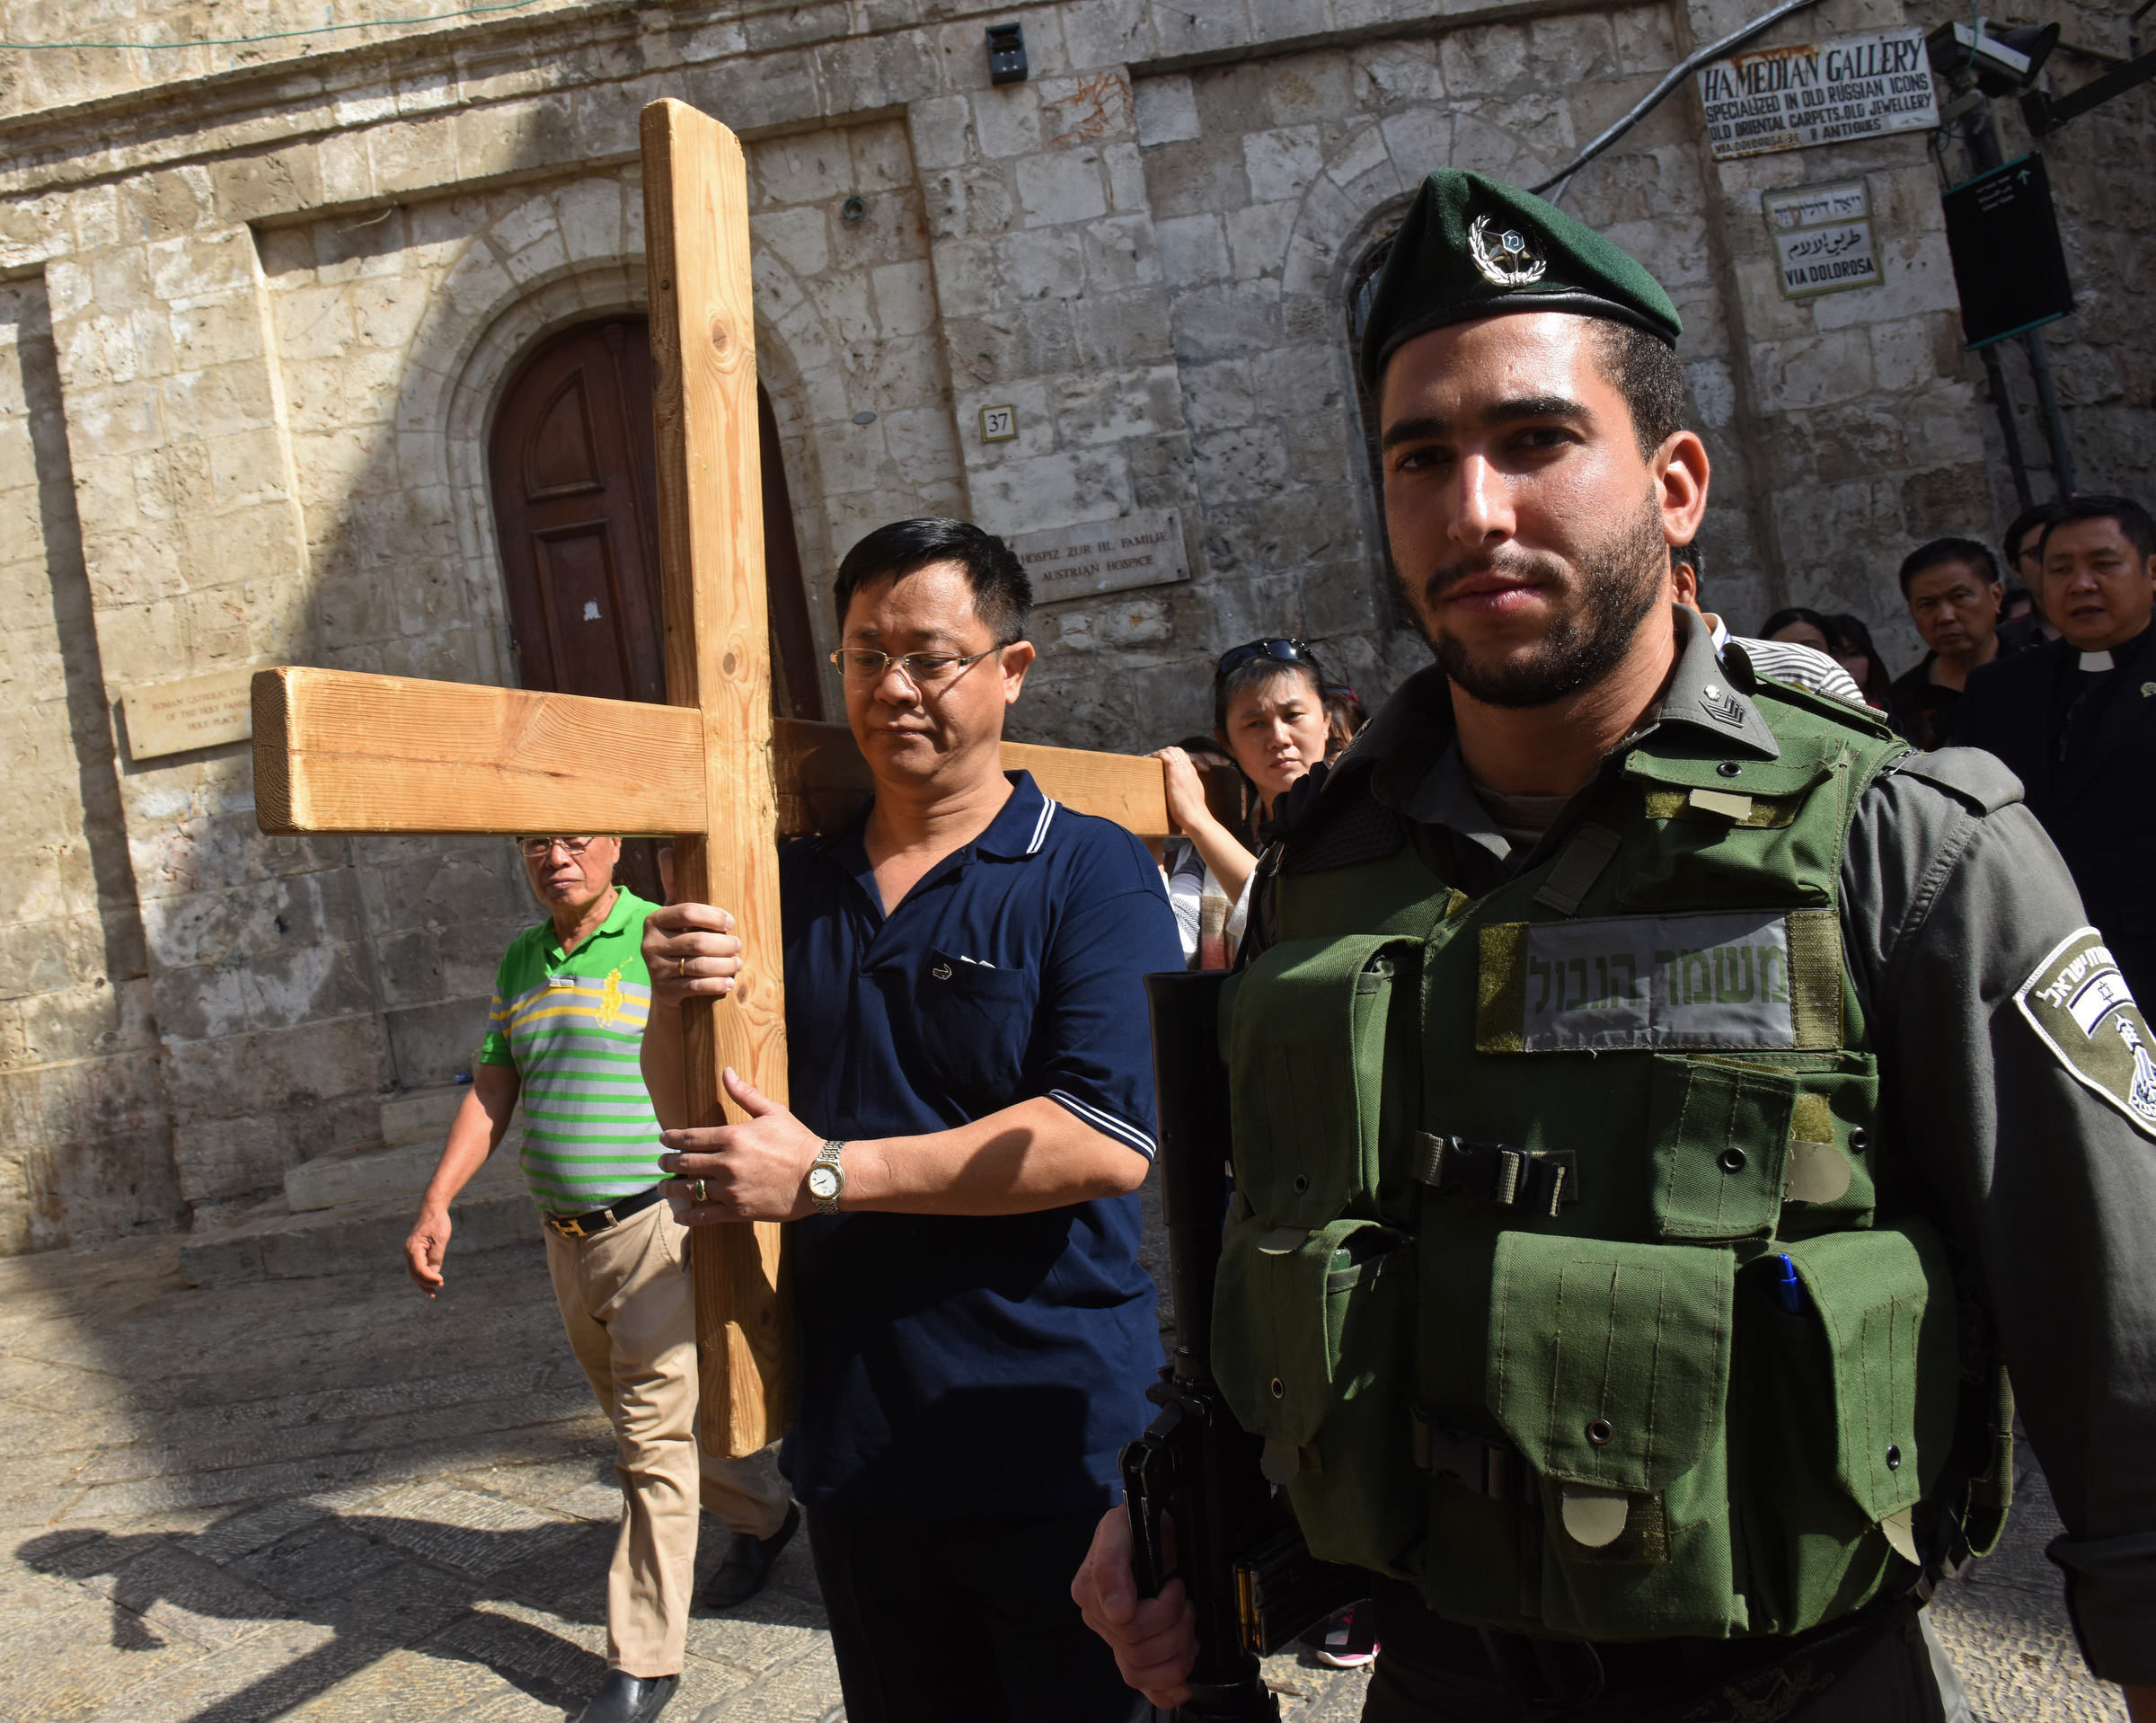 An Israeli border police officer stands near Catholic tourists from Indonesia as they carry a cross Oct. 18 on the Via Dolorosa in Jerusalem's Old City, near a site where several recent stabbings have taken place. (Debbie Hill/CNS)